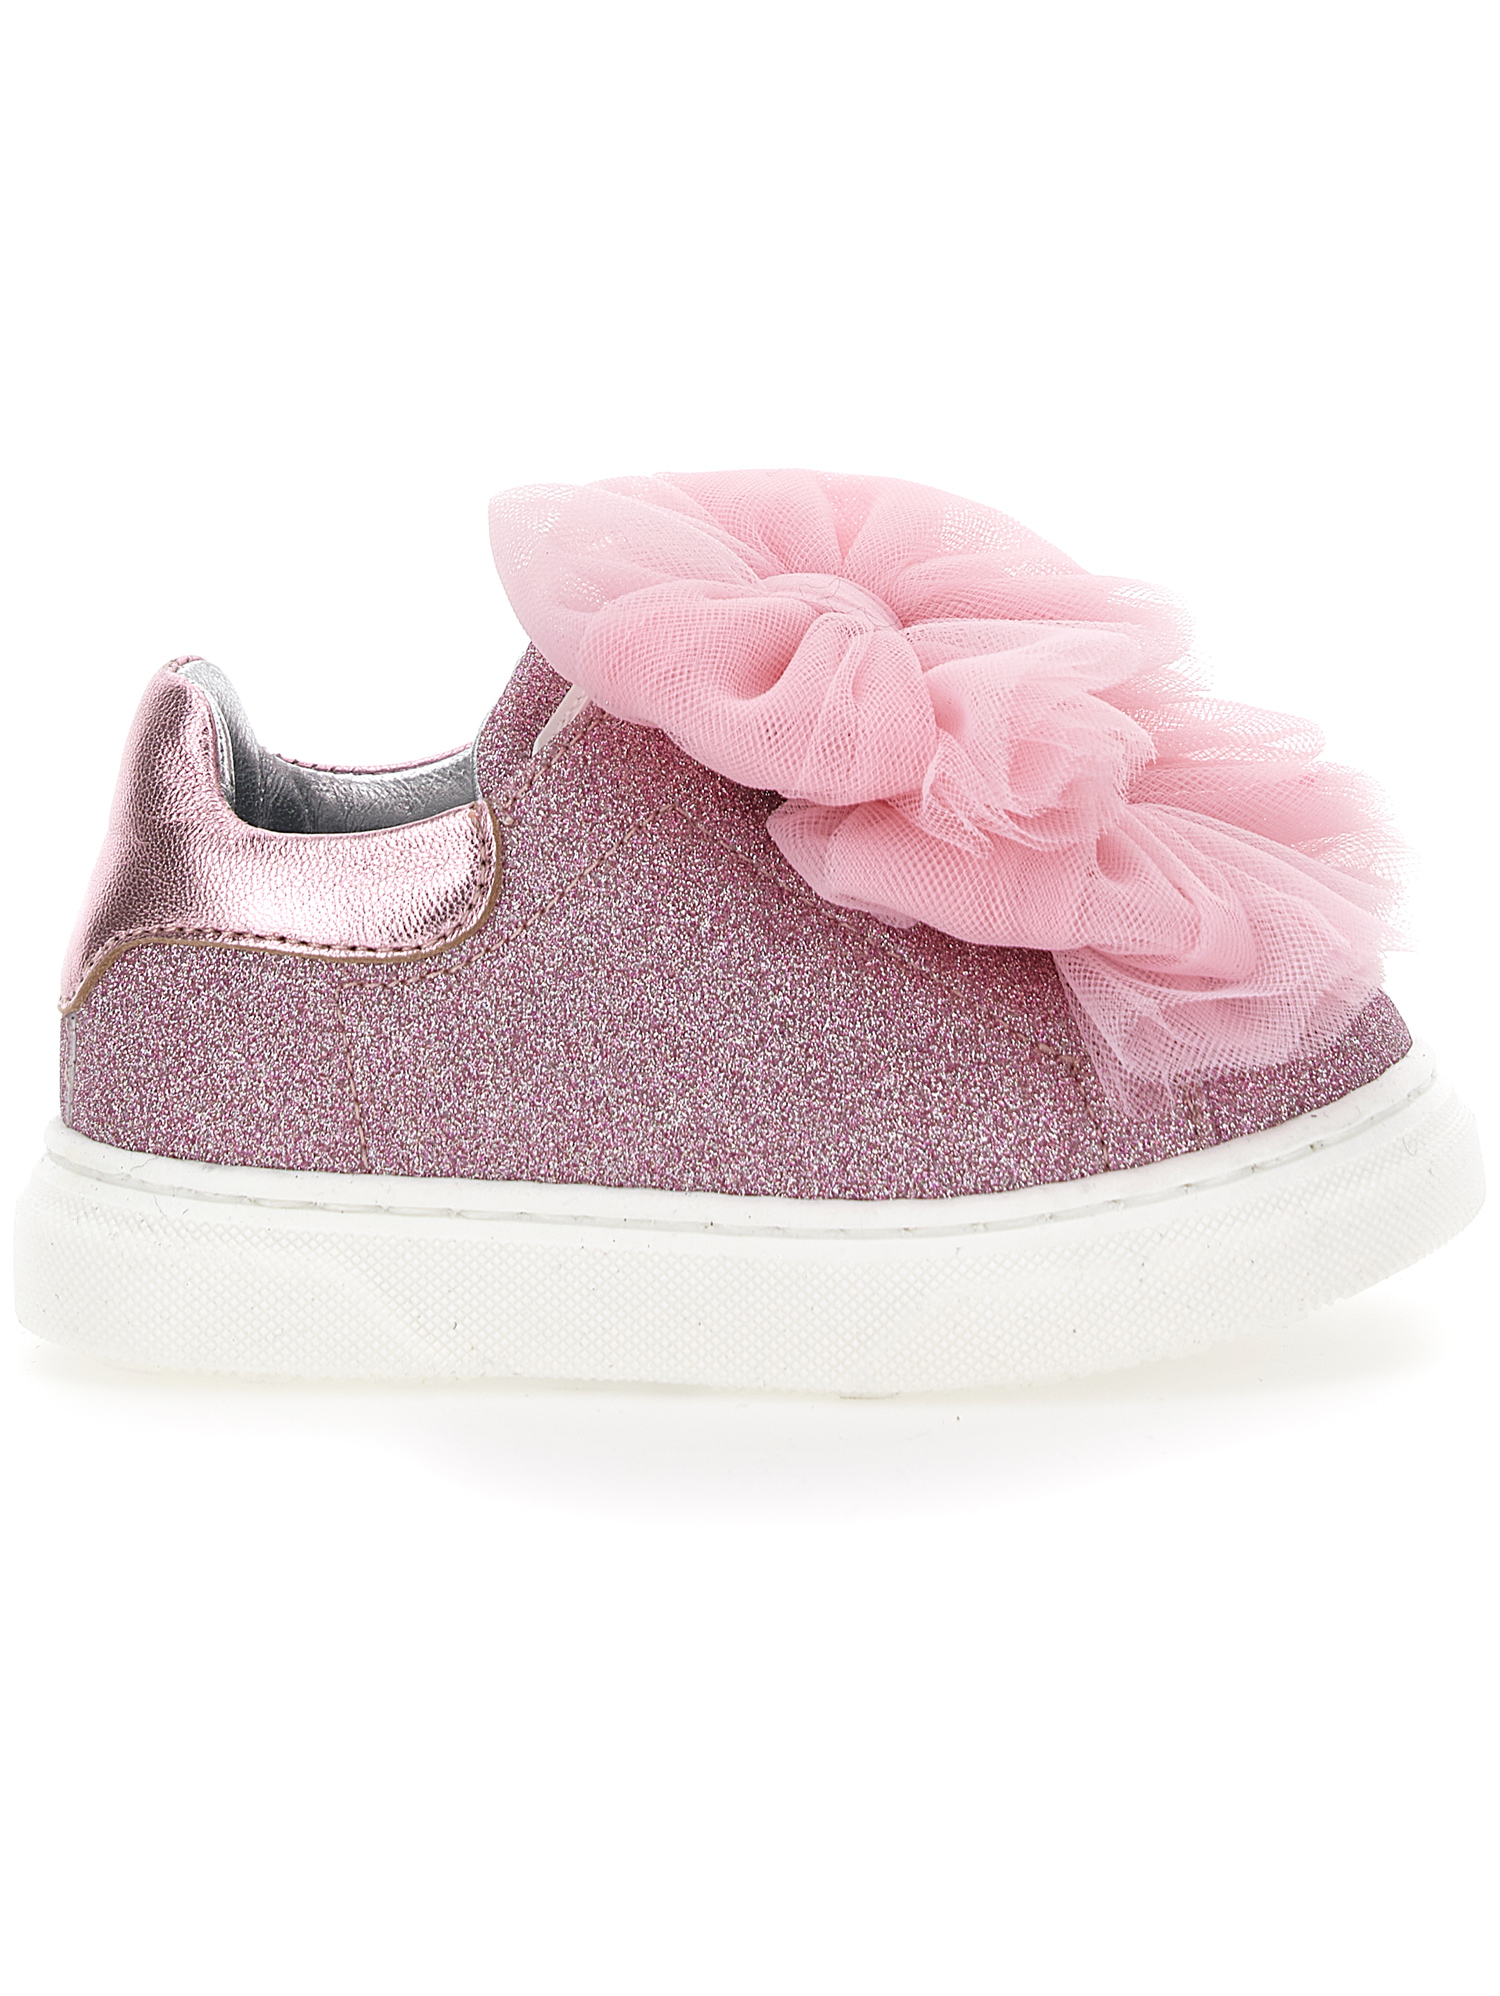 Monnalisa Glitter Sneakers With Bows In Dusty Pink Rose